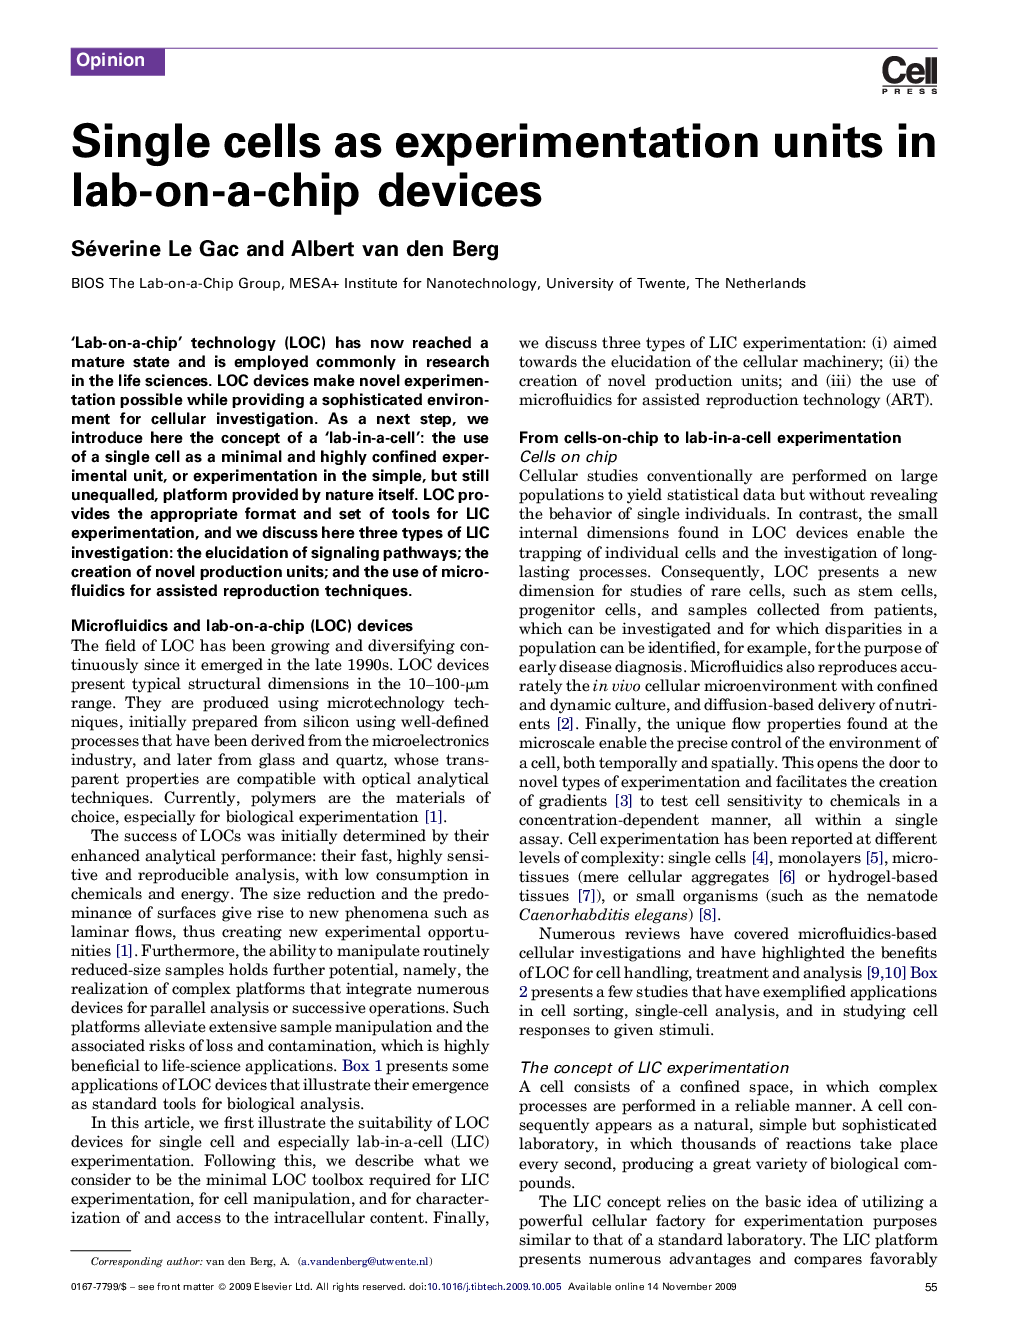 Single cells as experimentation units in lab-on-a-chip devices